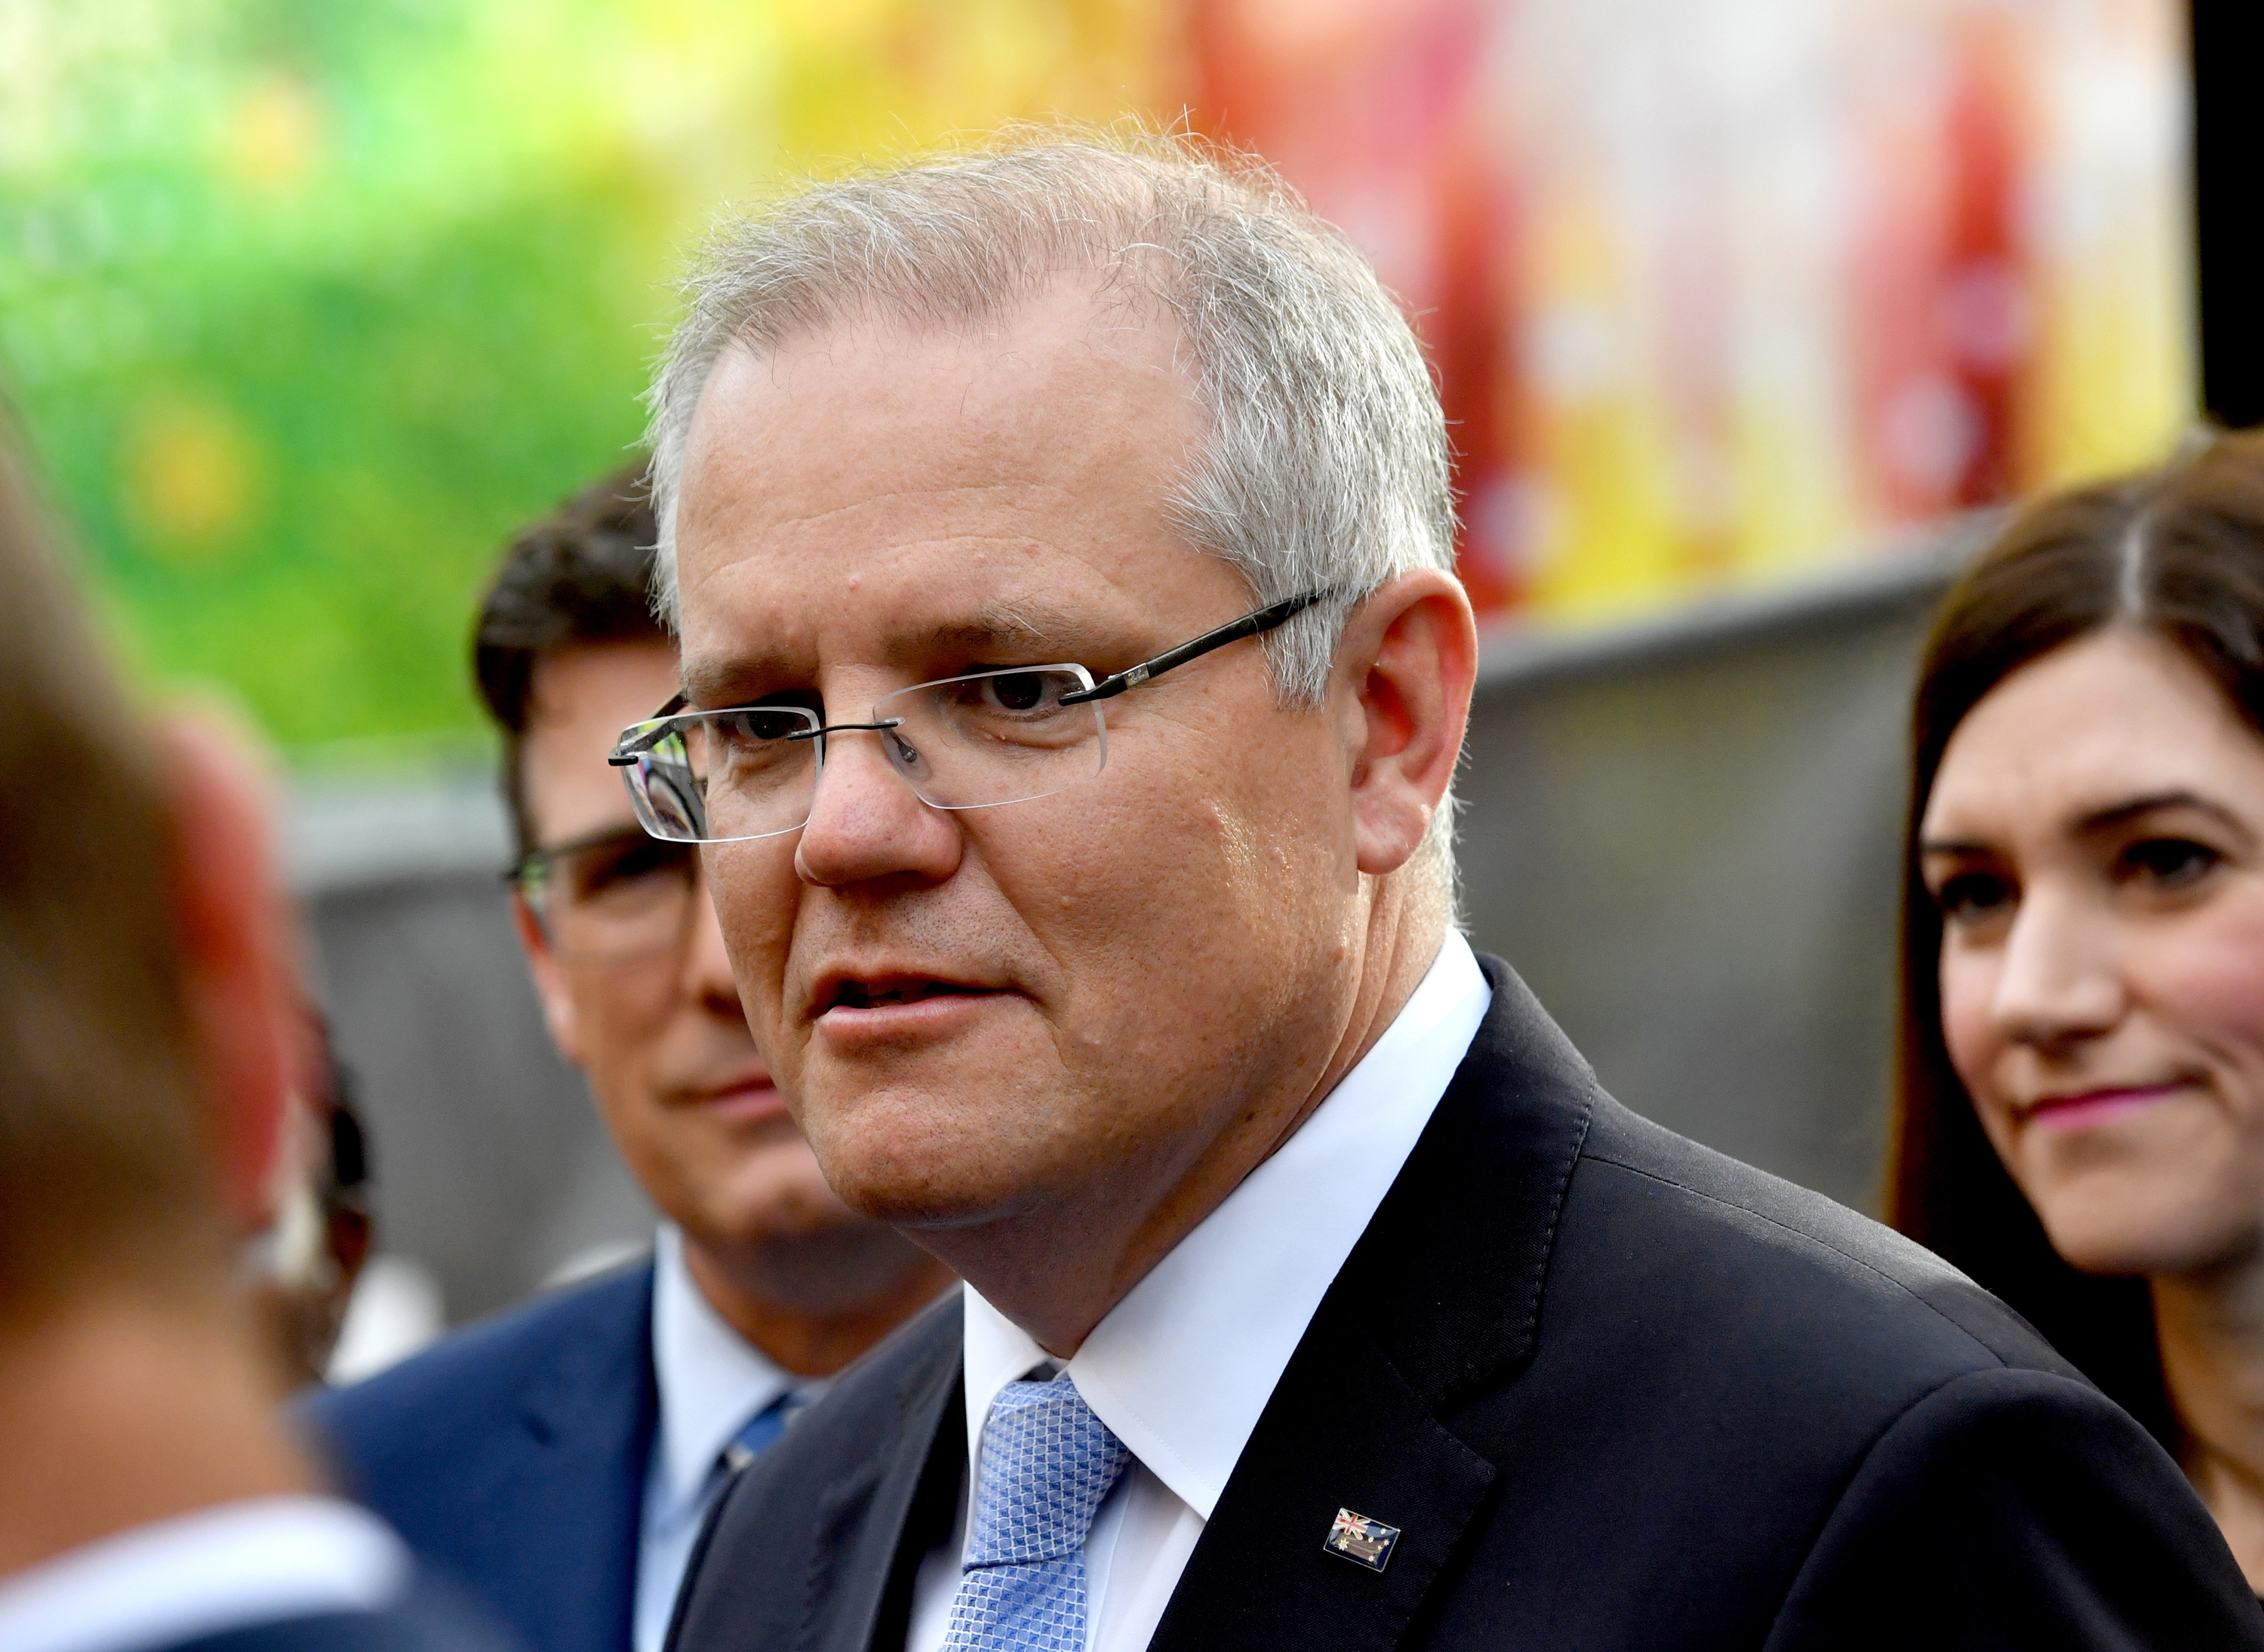 epa07224761 Australian Prime Minister Scott Morrison is seen at the former Royal Adelaide Hospital site in Adelaide, Australia, 12 December 2018. Adelaide has been selected by the federal government as the location for the new Australian Space Agency.  EPA/Sam Wundke  AUSTRALIA AND NEW ZEALAND OUT